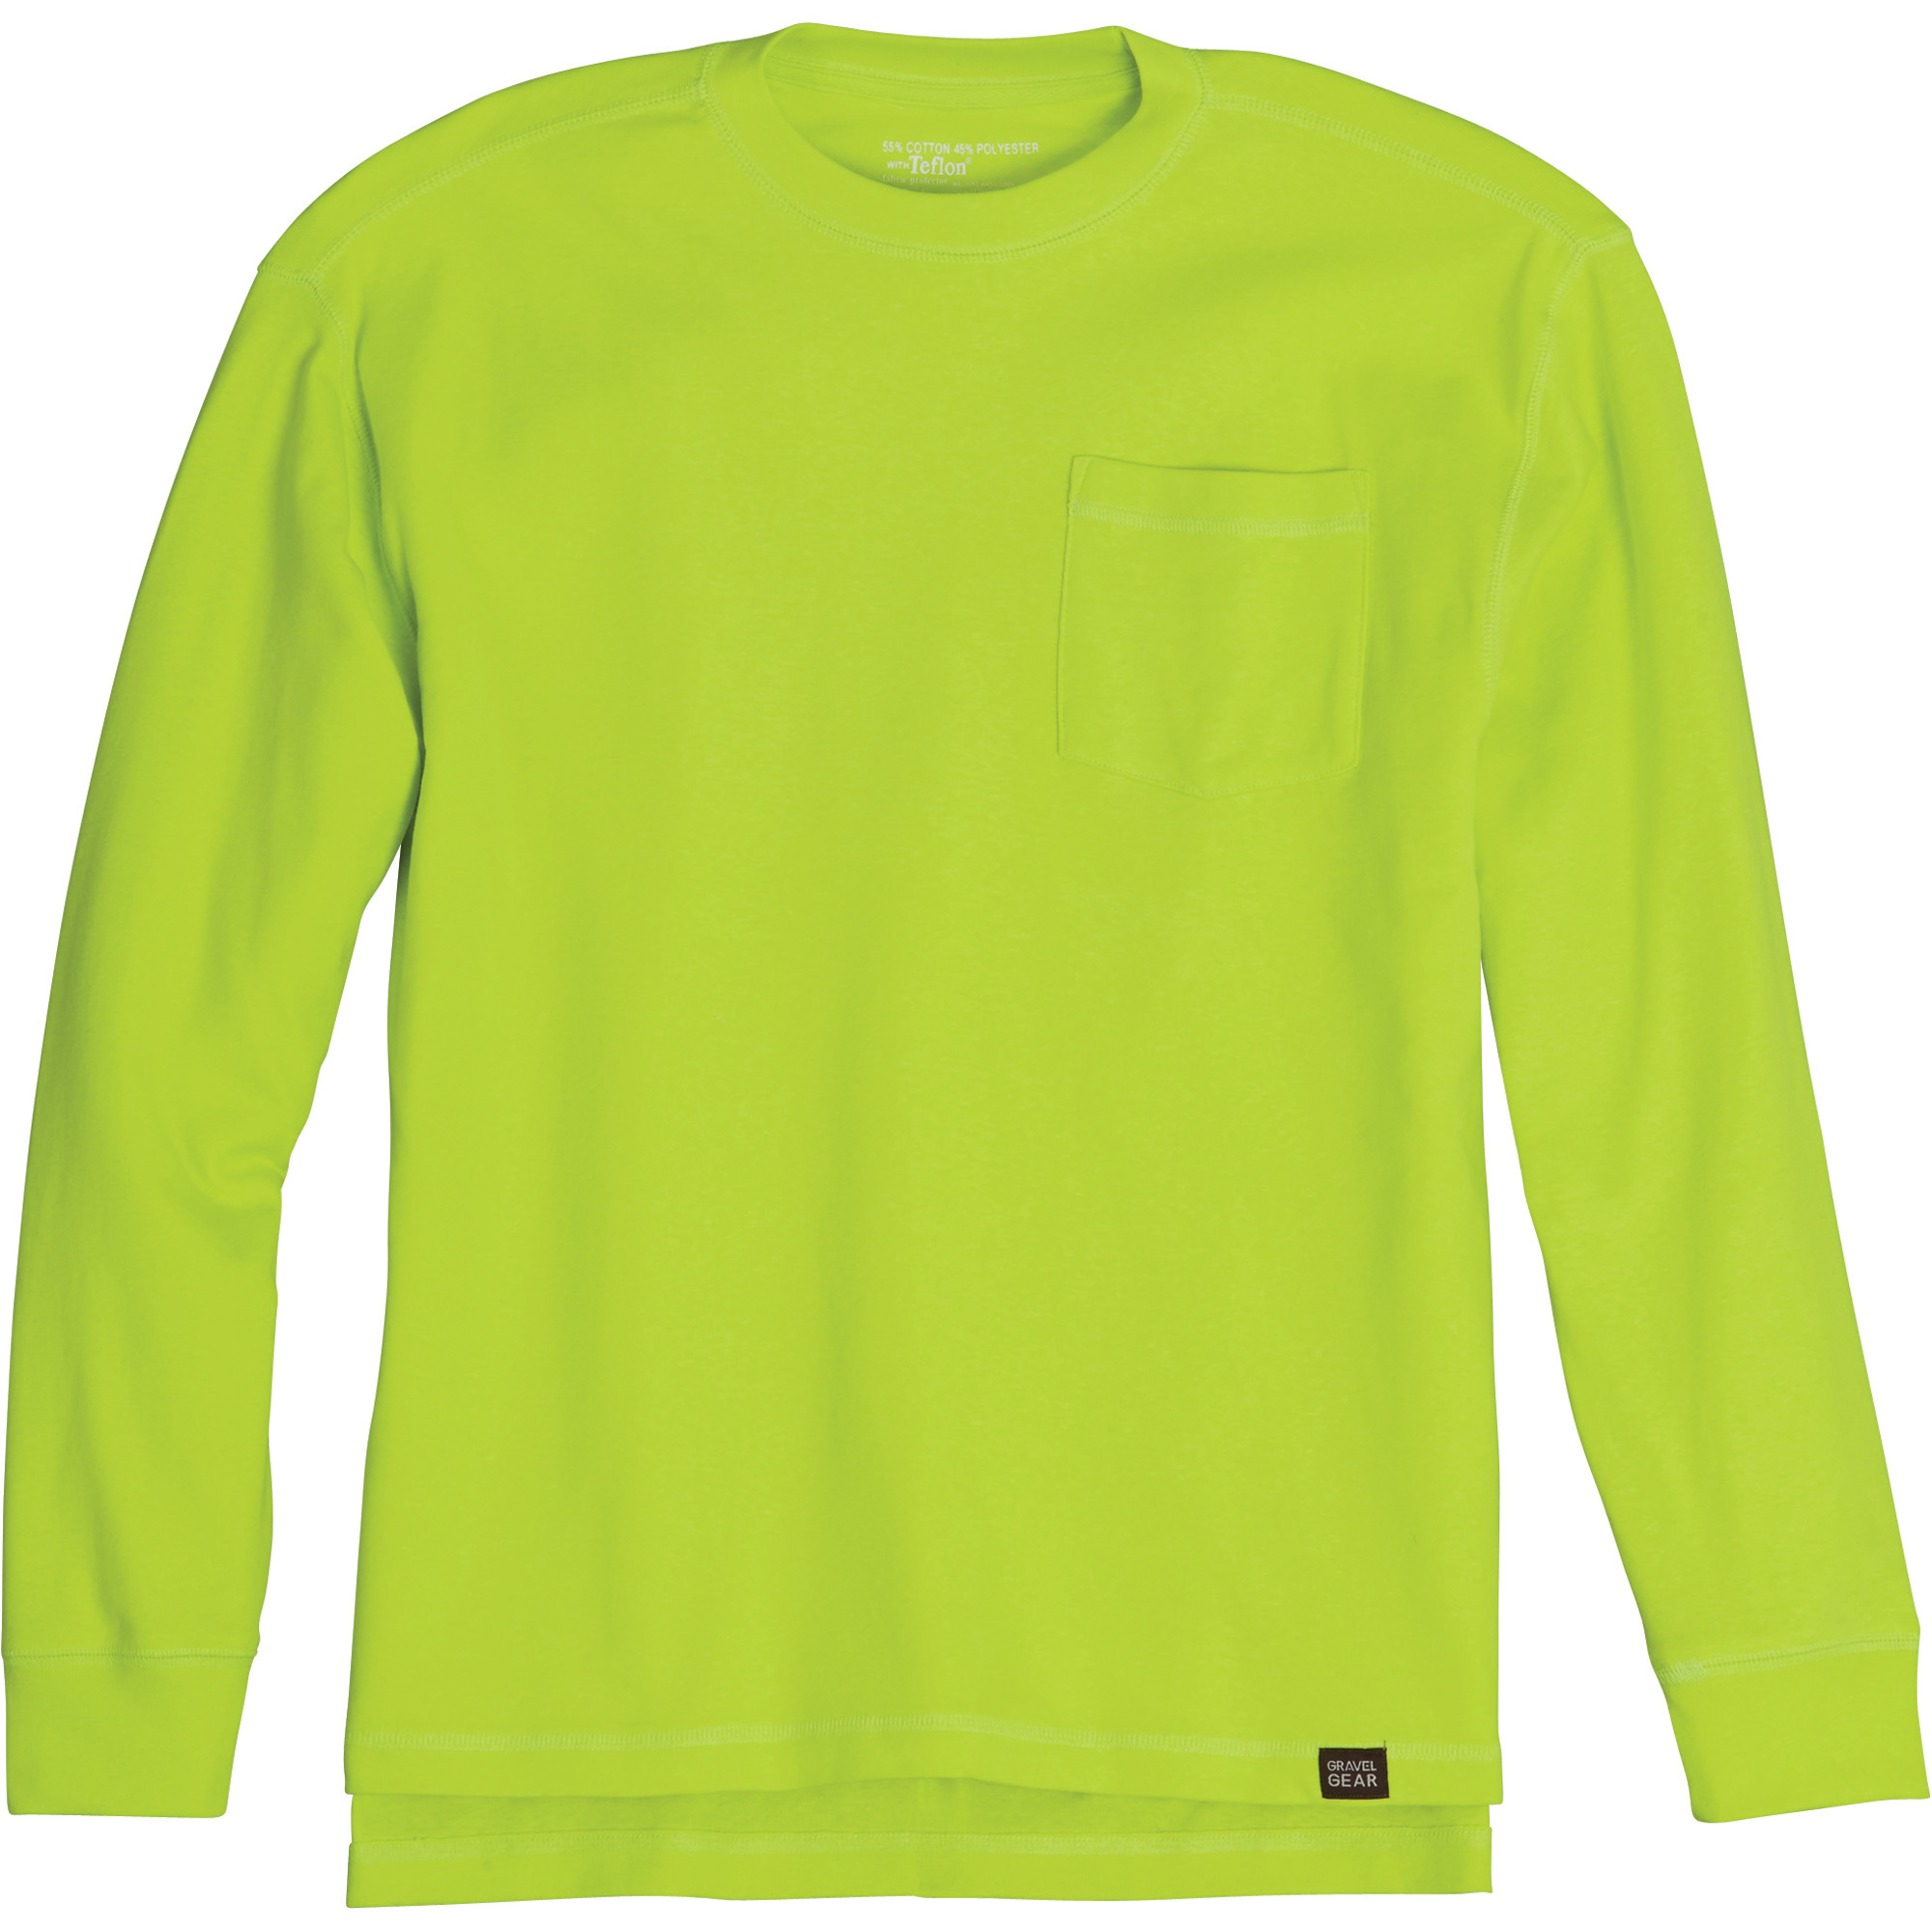 Gravel Gear Men's Warrior Stain-Resistant Long Sleeve Pocket T-Shirt with Teflon Fabric Protector â Lime, 2XL